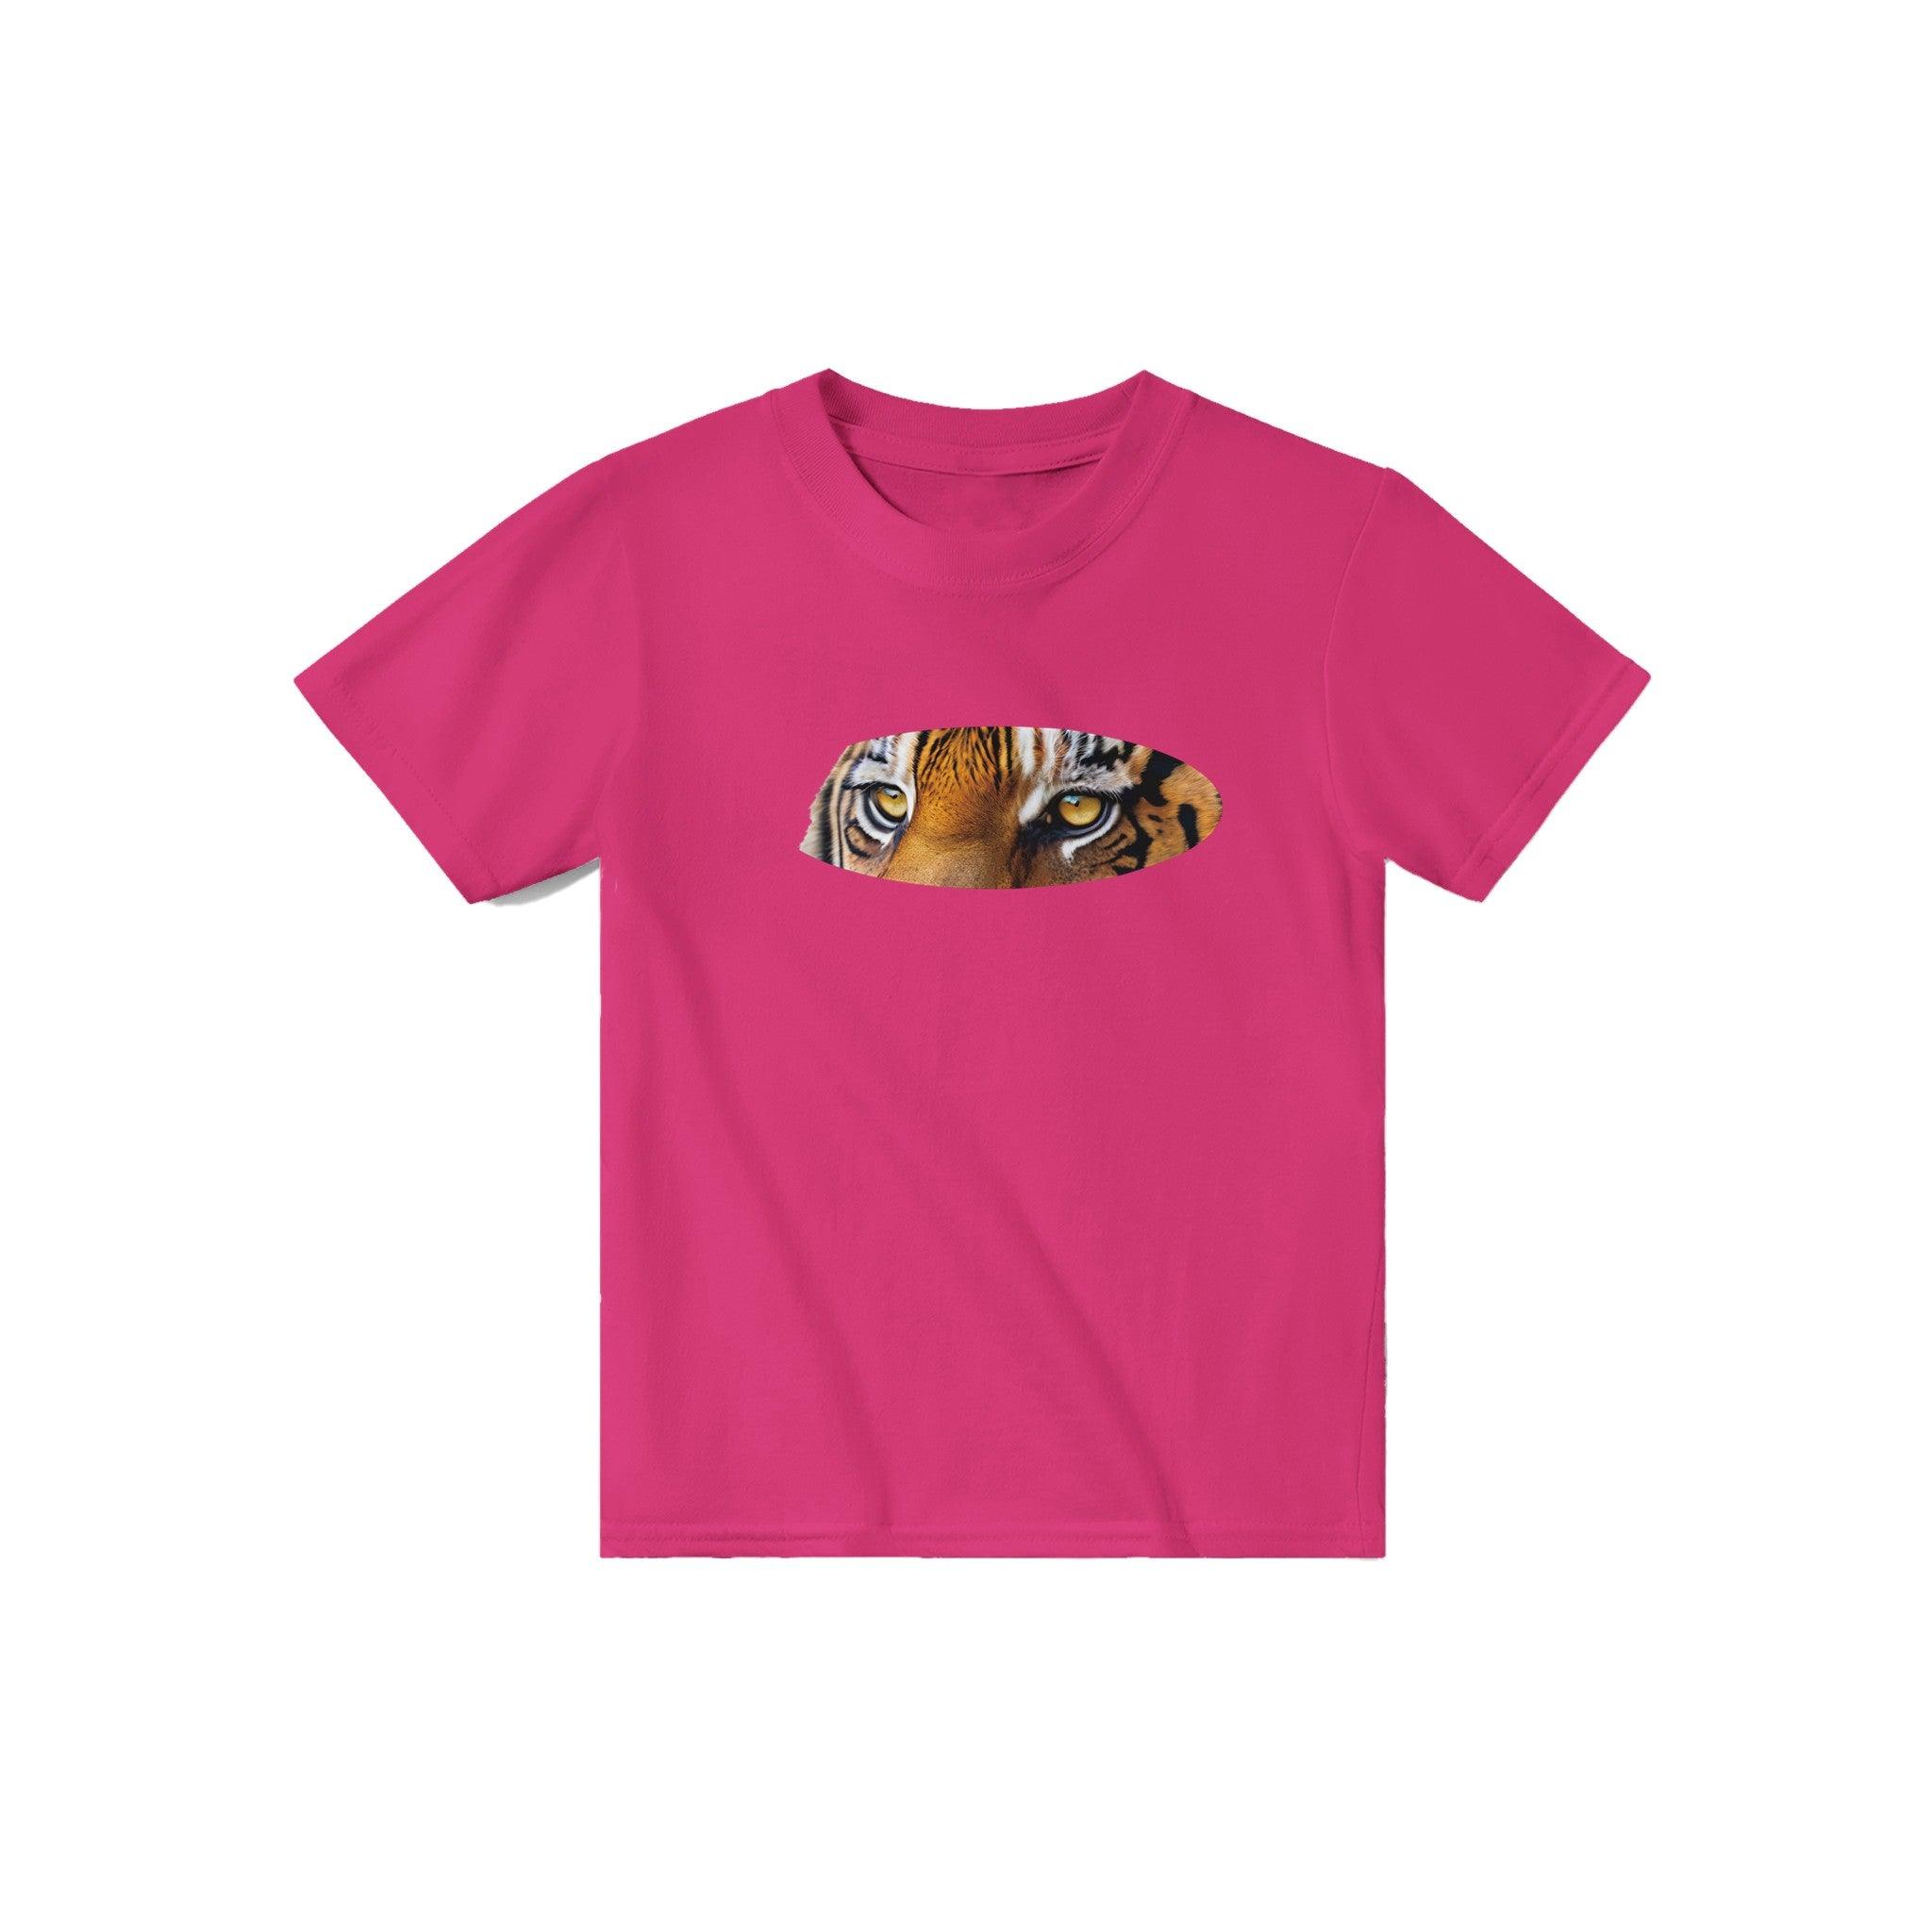 'Eye Of The Tiger' Baby Tee - POMA